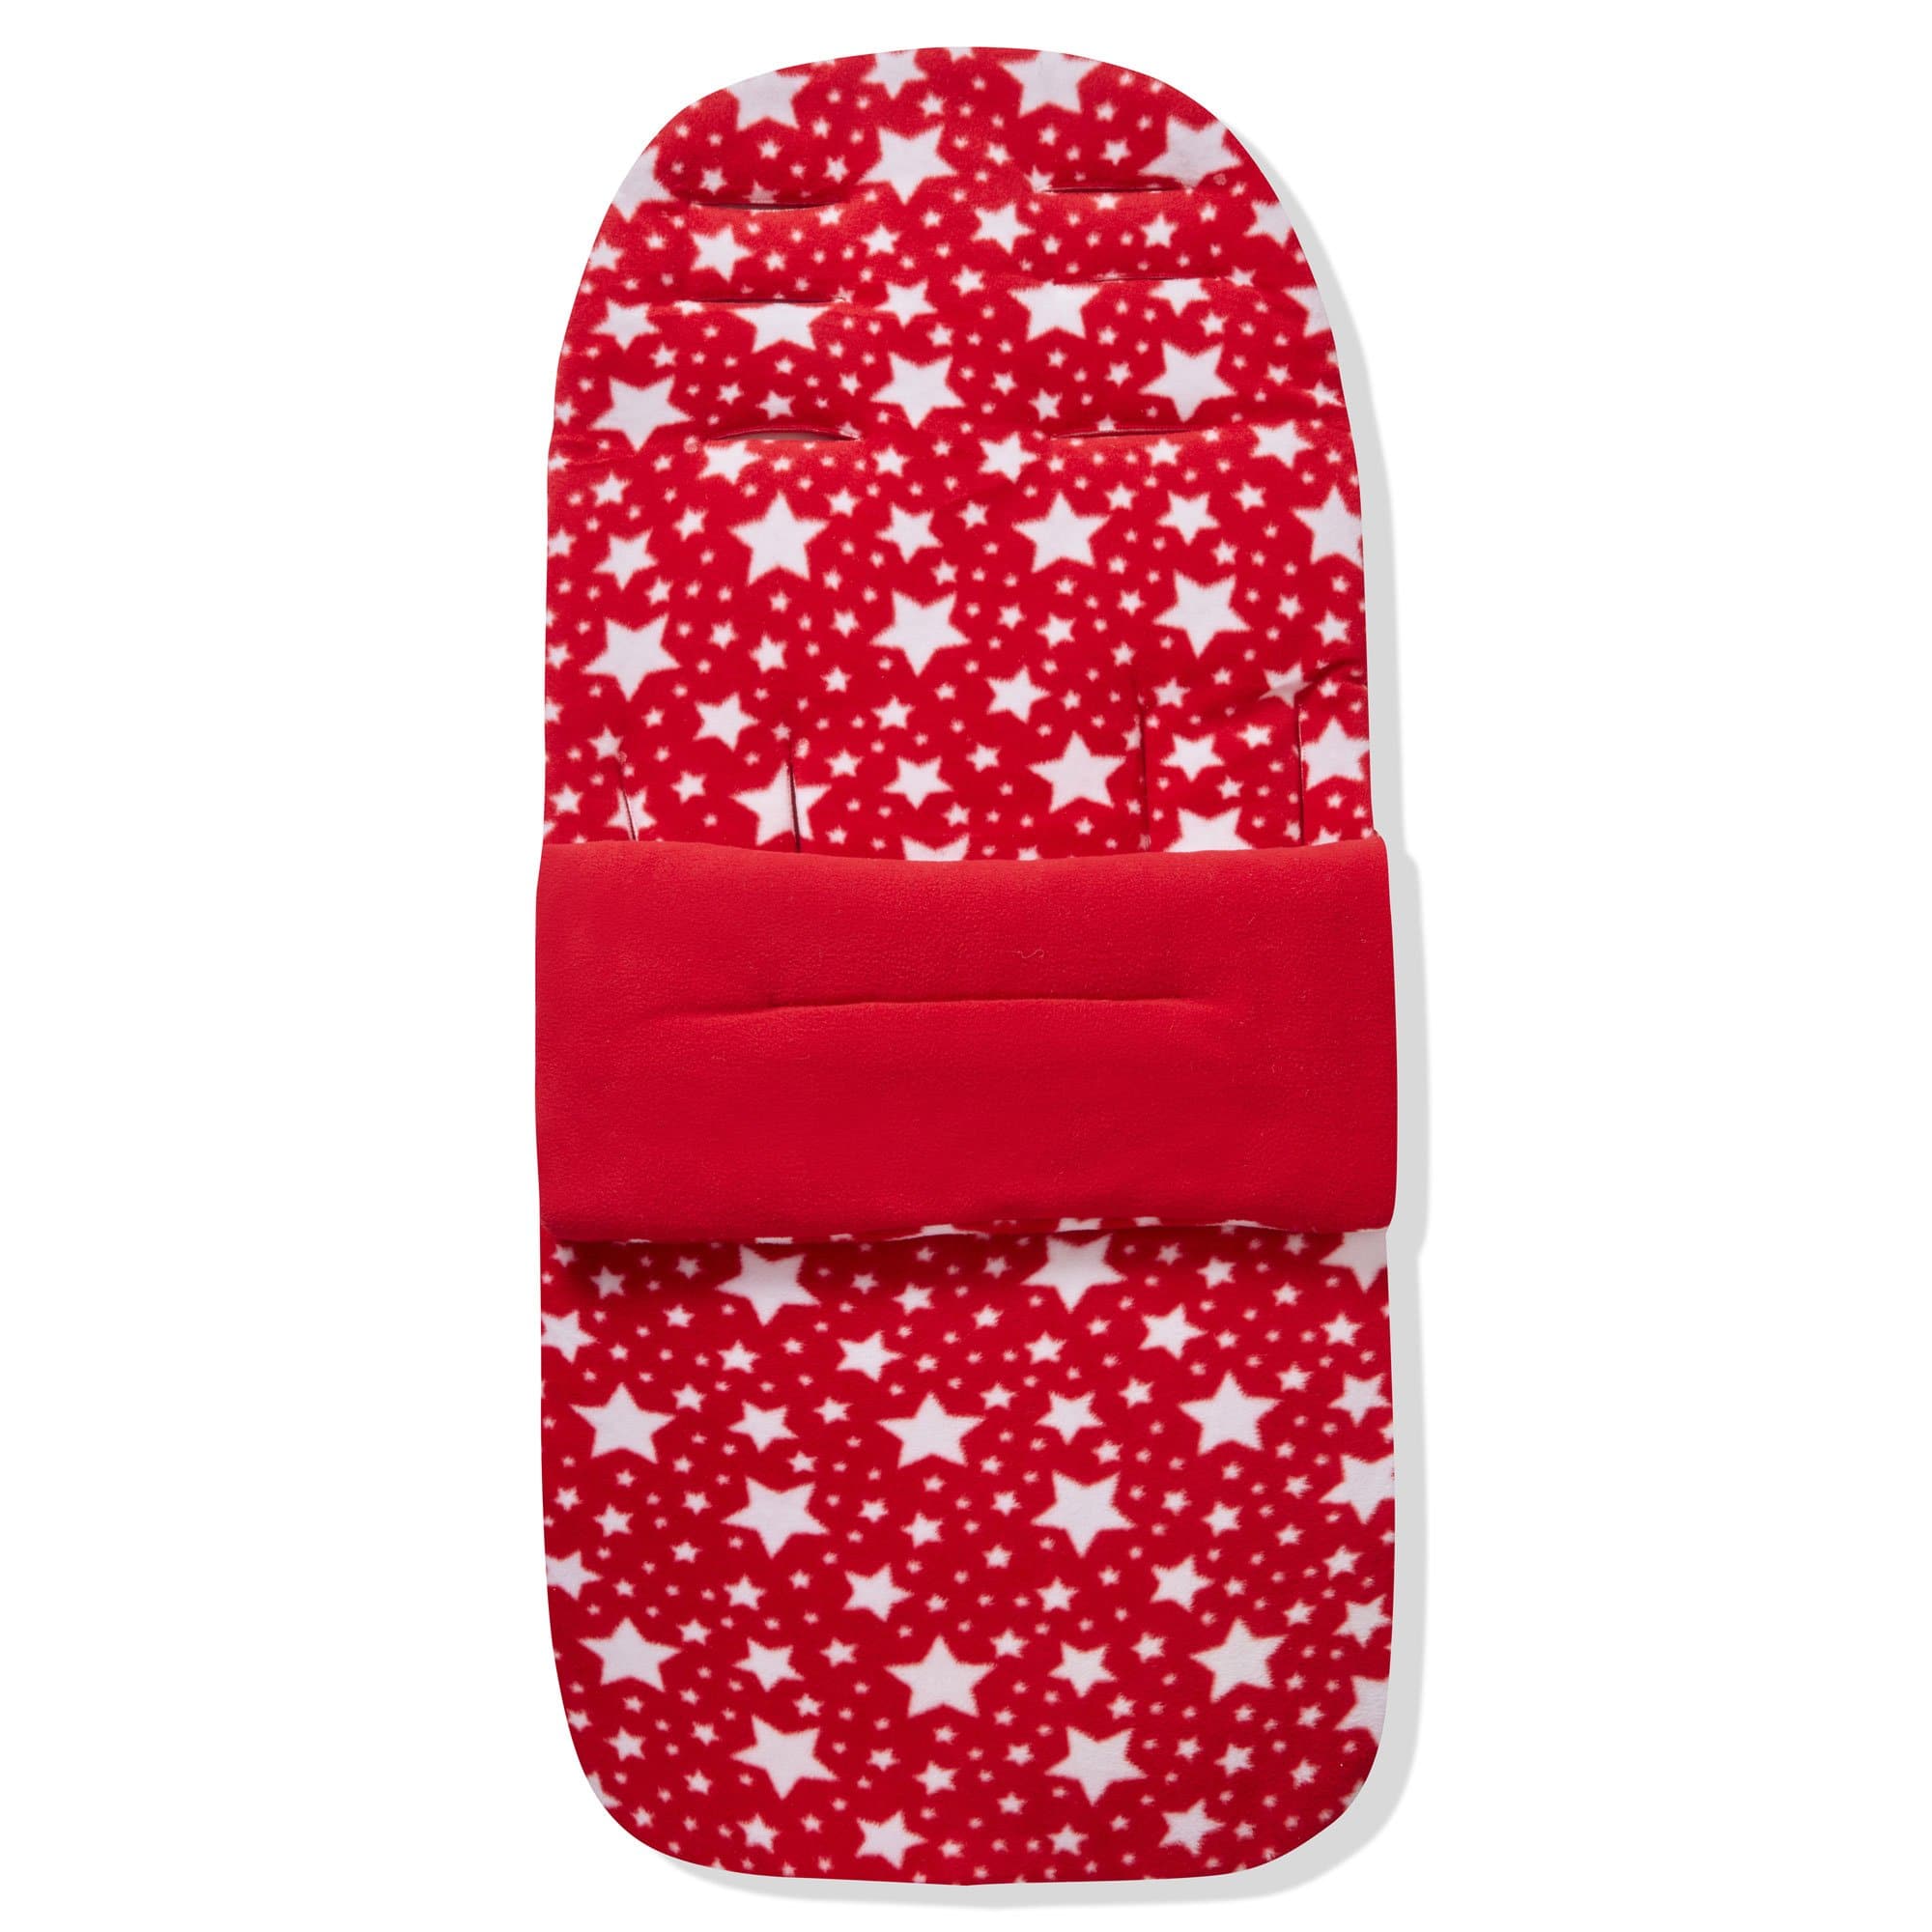 Fleece Footmuff / Cosy Toes Compatible With BabyCare - For Your Little One